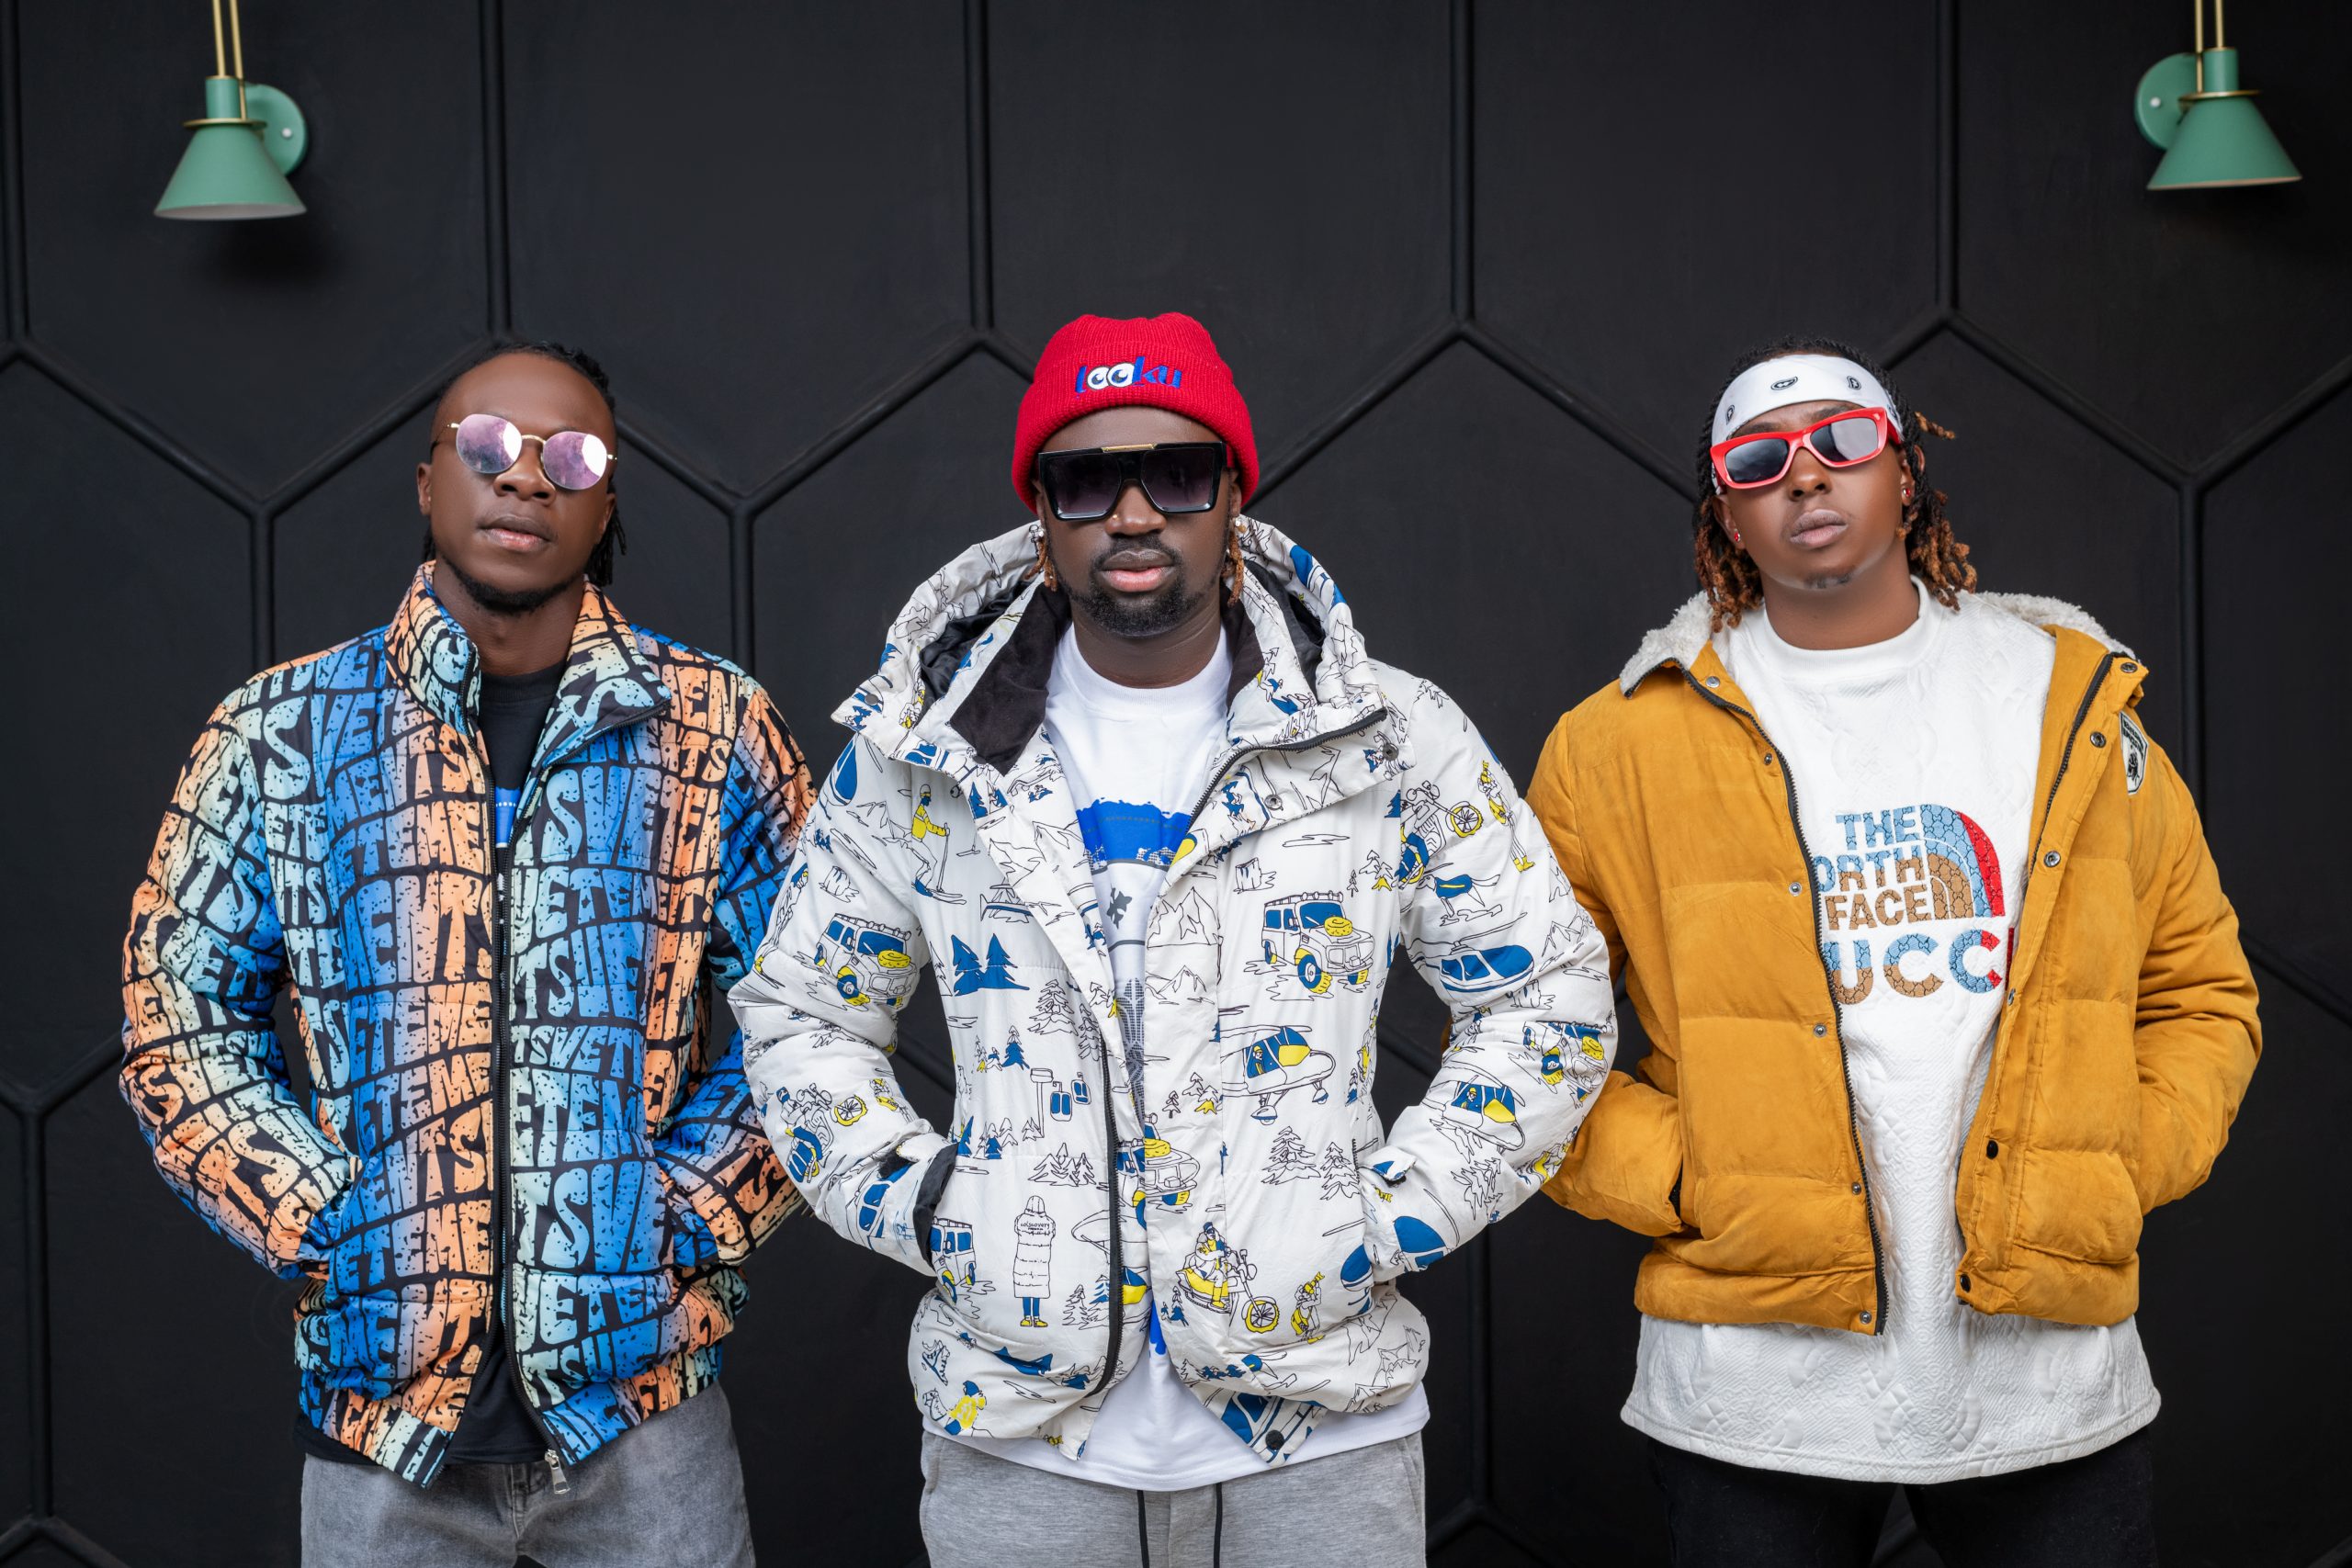 Wabaya is the current East Africa’s Musical Phenomenon topping charts